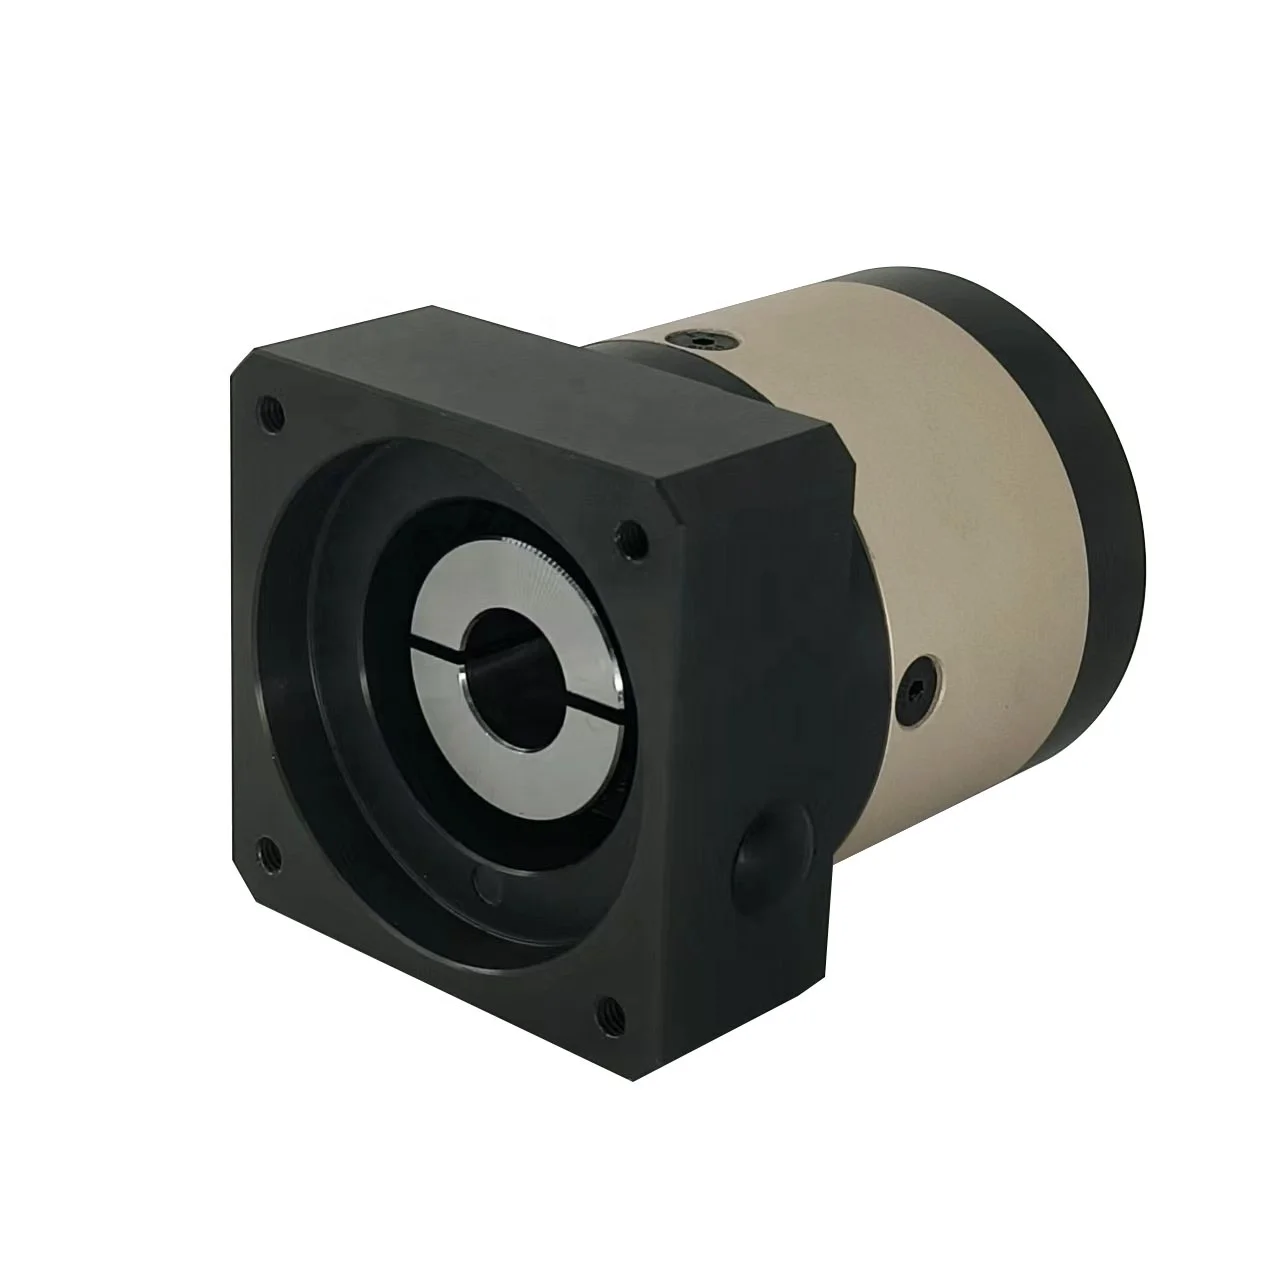 TQG Machine reduction gearbox reducer PLE040 series for Medical equipment Reductor ratio15 :1